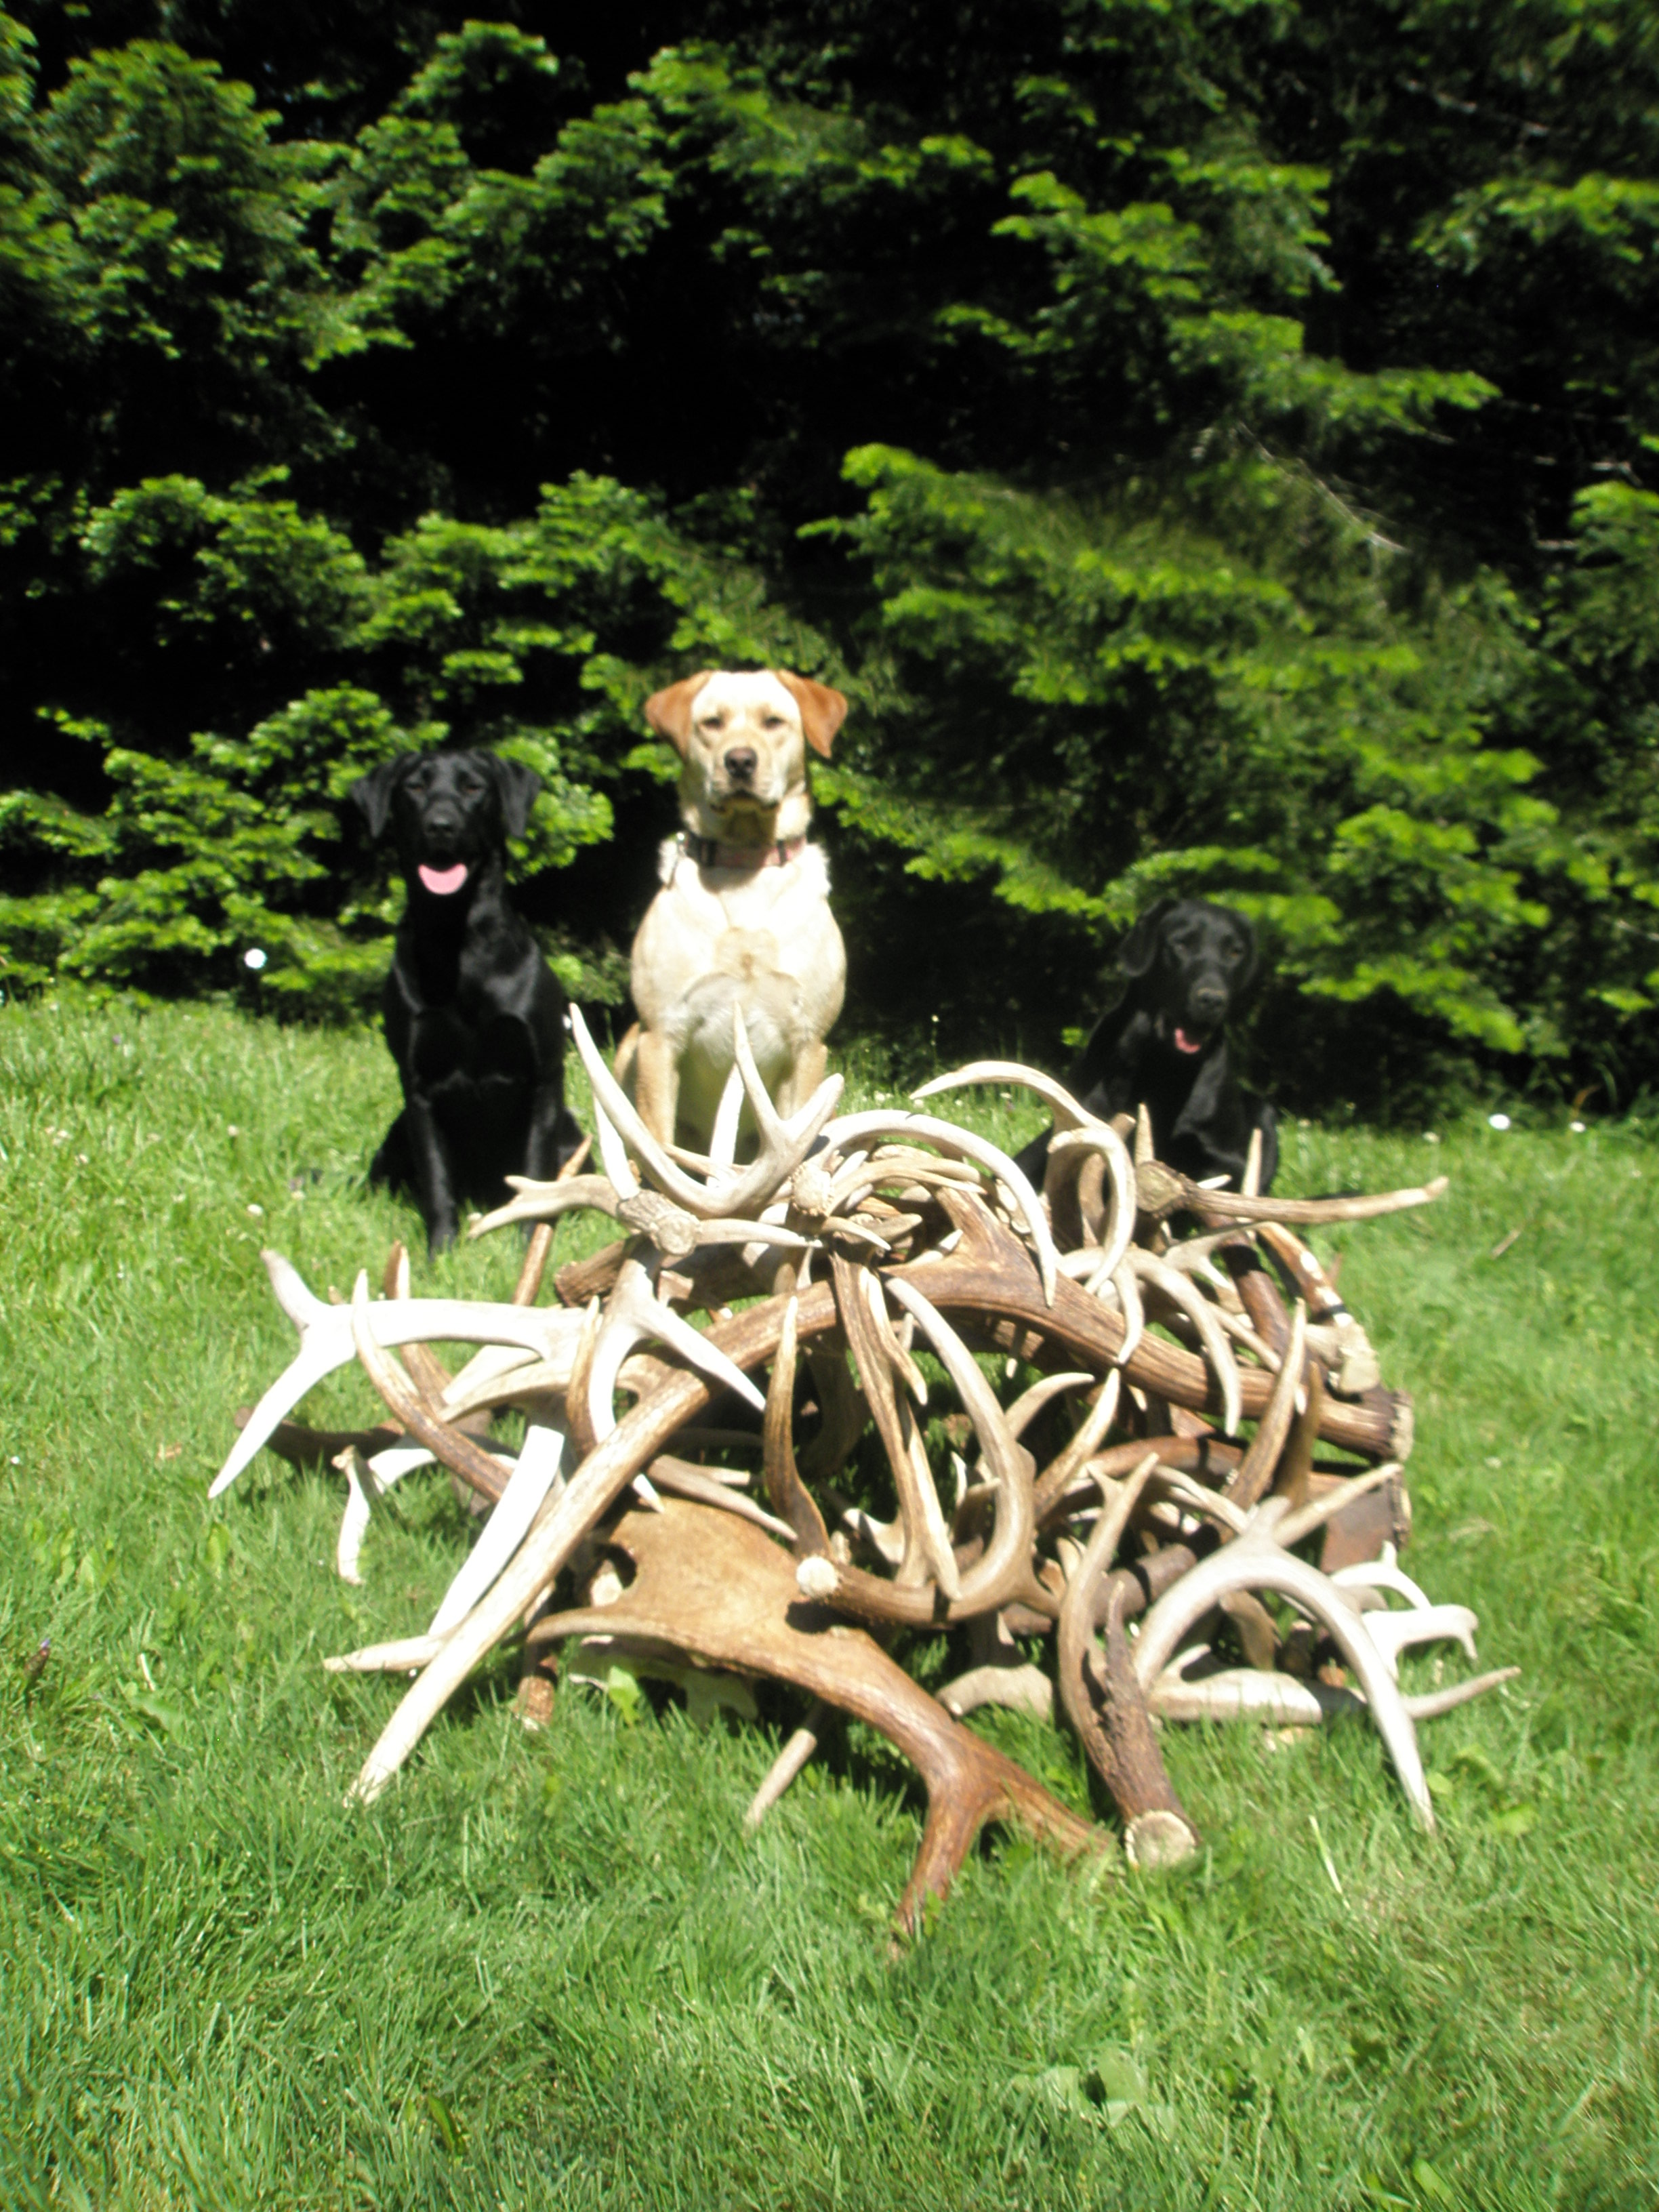 north idaho shed antler dogs trained horn hunting